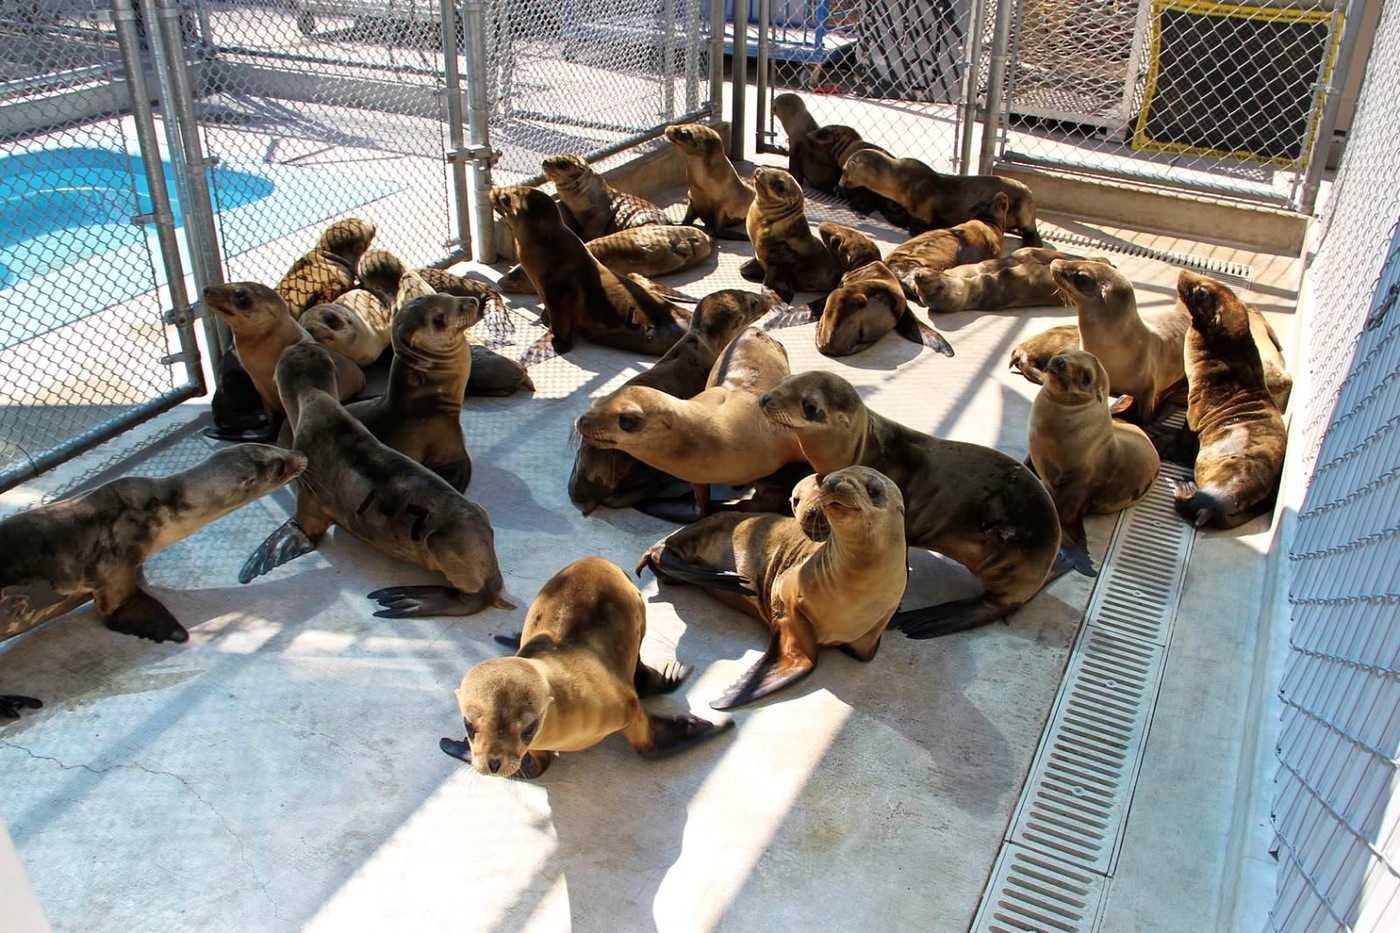 Emaciated juvenile sea lions undergoing rehabilitation at the Marine Mammal Center in California. Their plight is thought to have been triggered by the unusually warm water conditions that persist in the coastal Pacific Ocean, upsetting the usual food web upon which sea lions and other wildlife depend. 